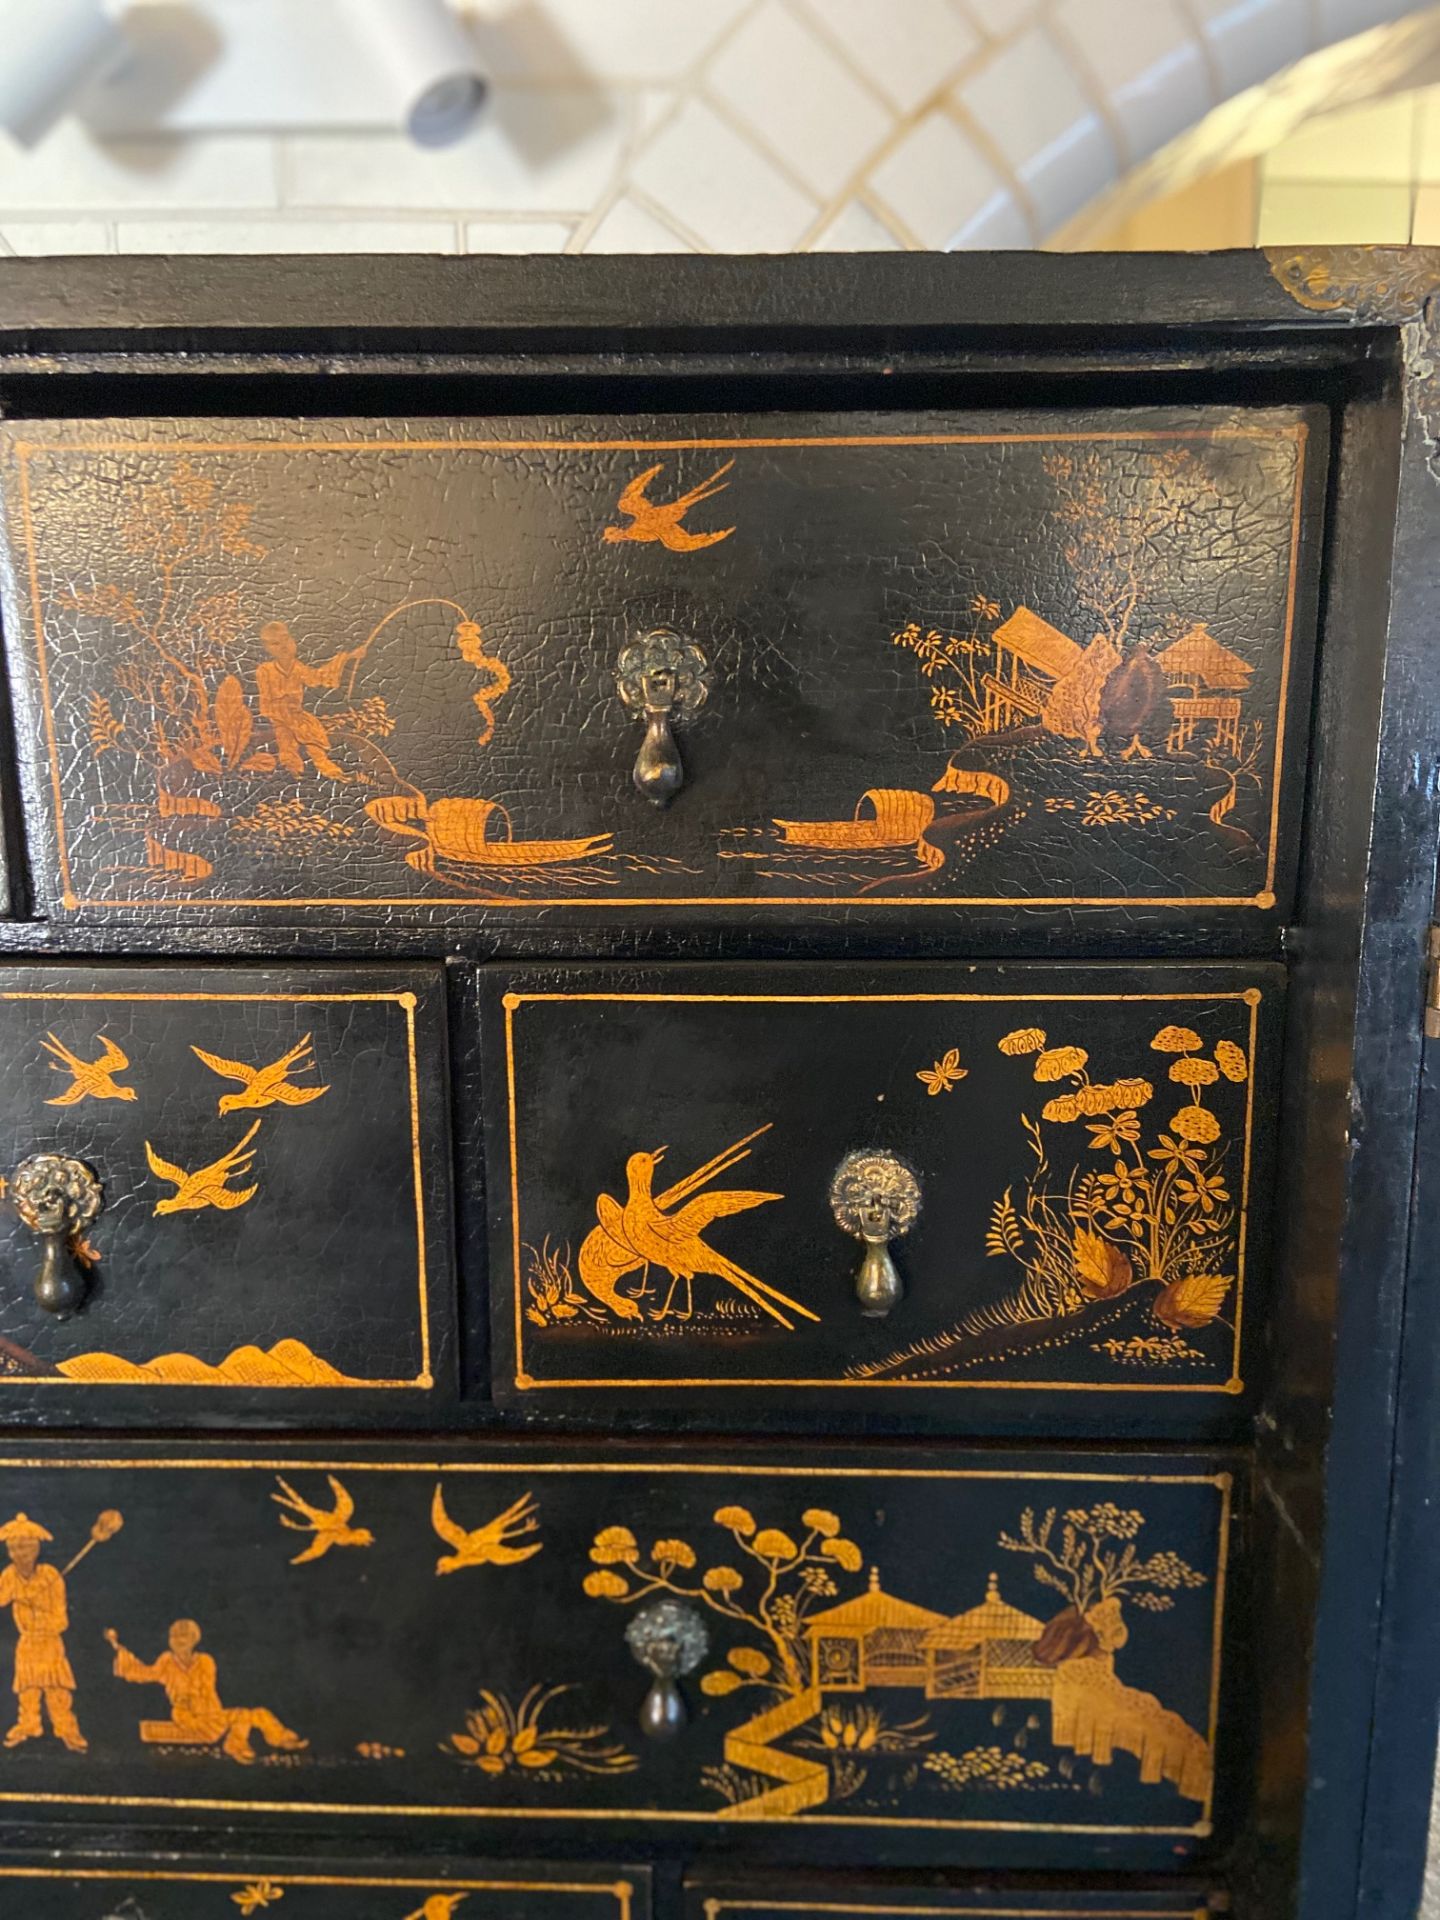 An early 18th century Chinese export black lacquer cabinet on a European stand - Image 28 of 36